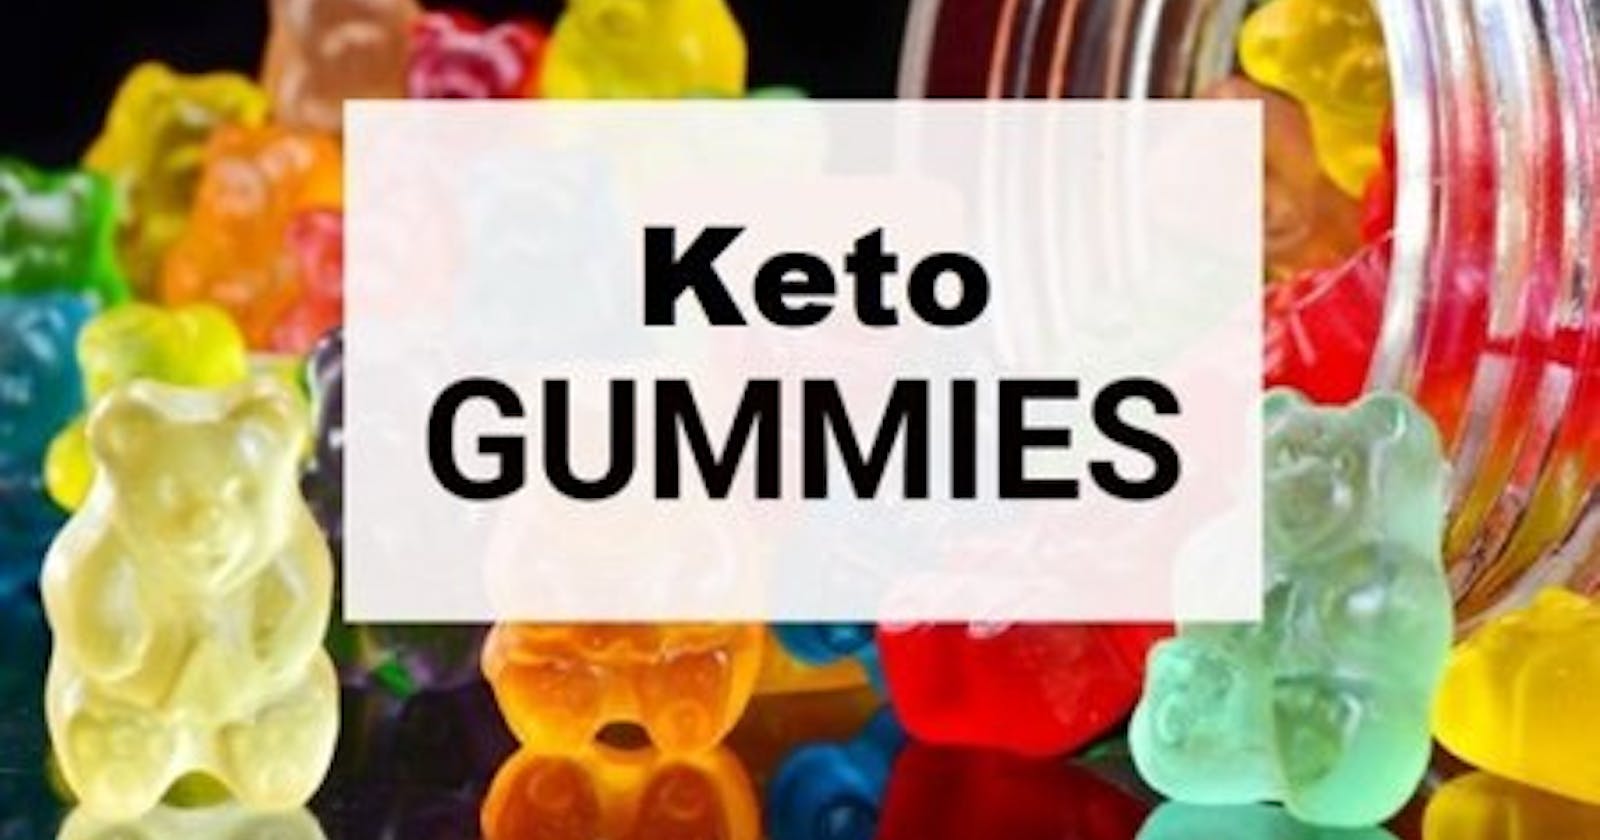 Keto Max Science Gummies Canada – (FAKE NEWS) IS IT SCAM OR TRUSTED A Guide to Transforming Your Body and Your Mind for Life?